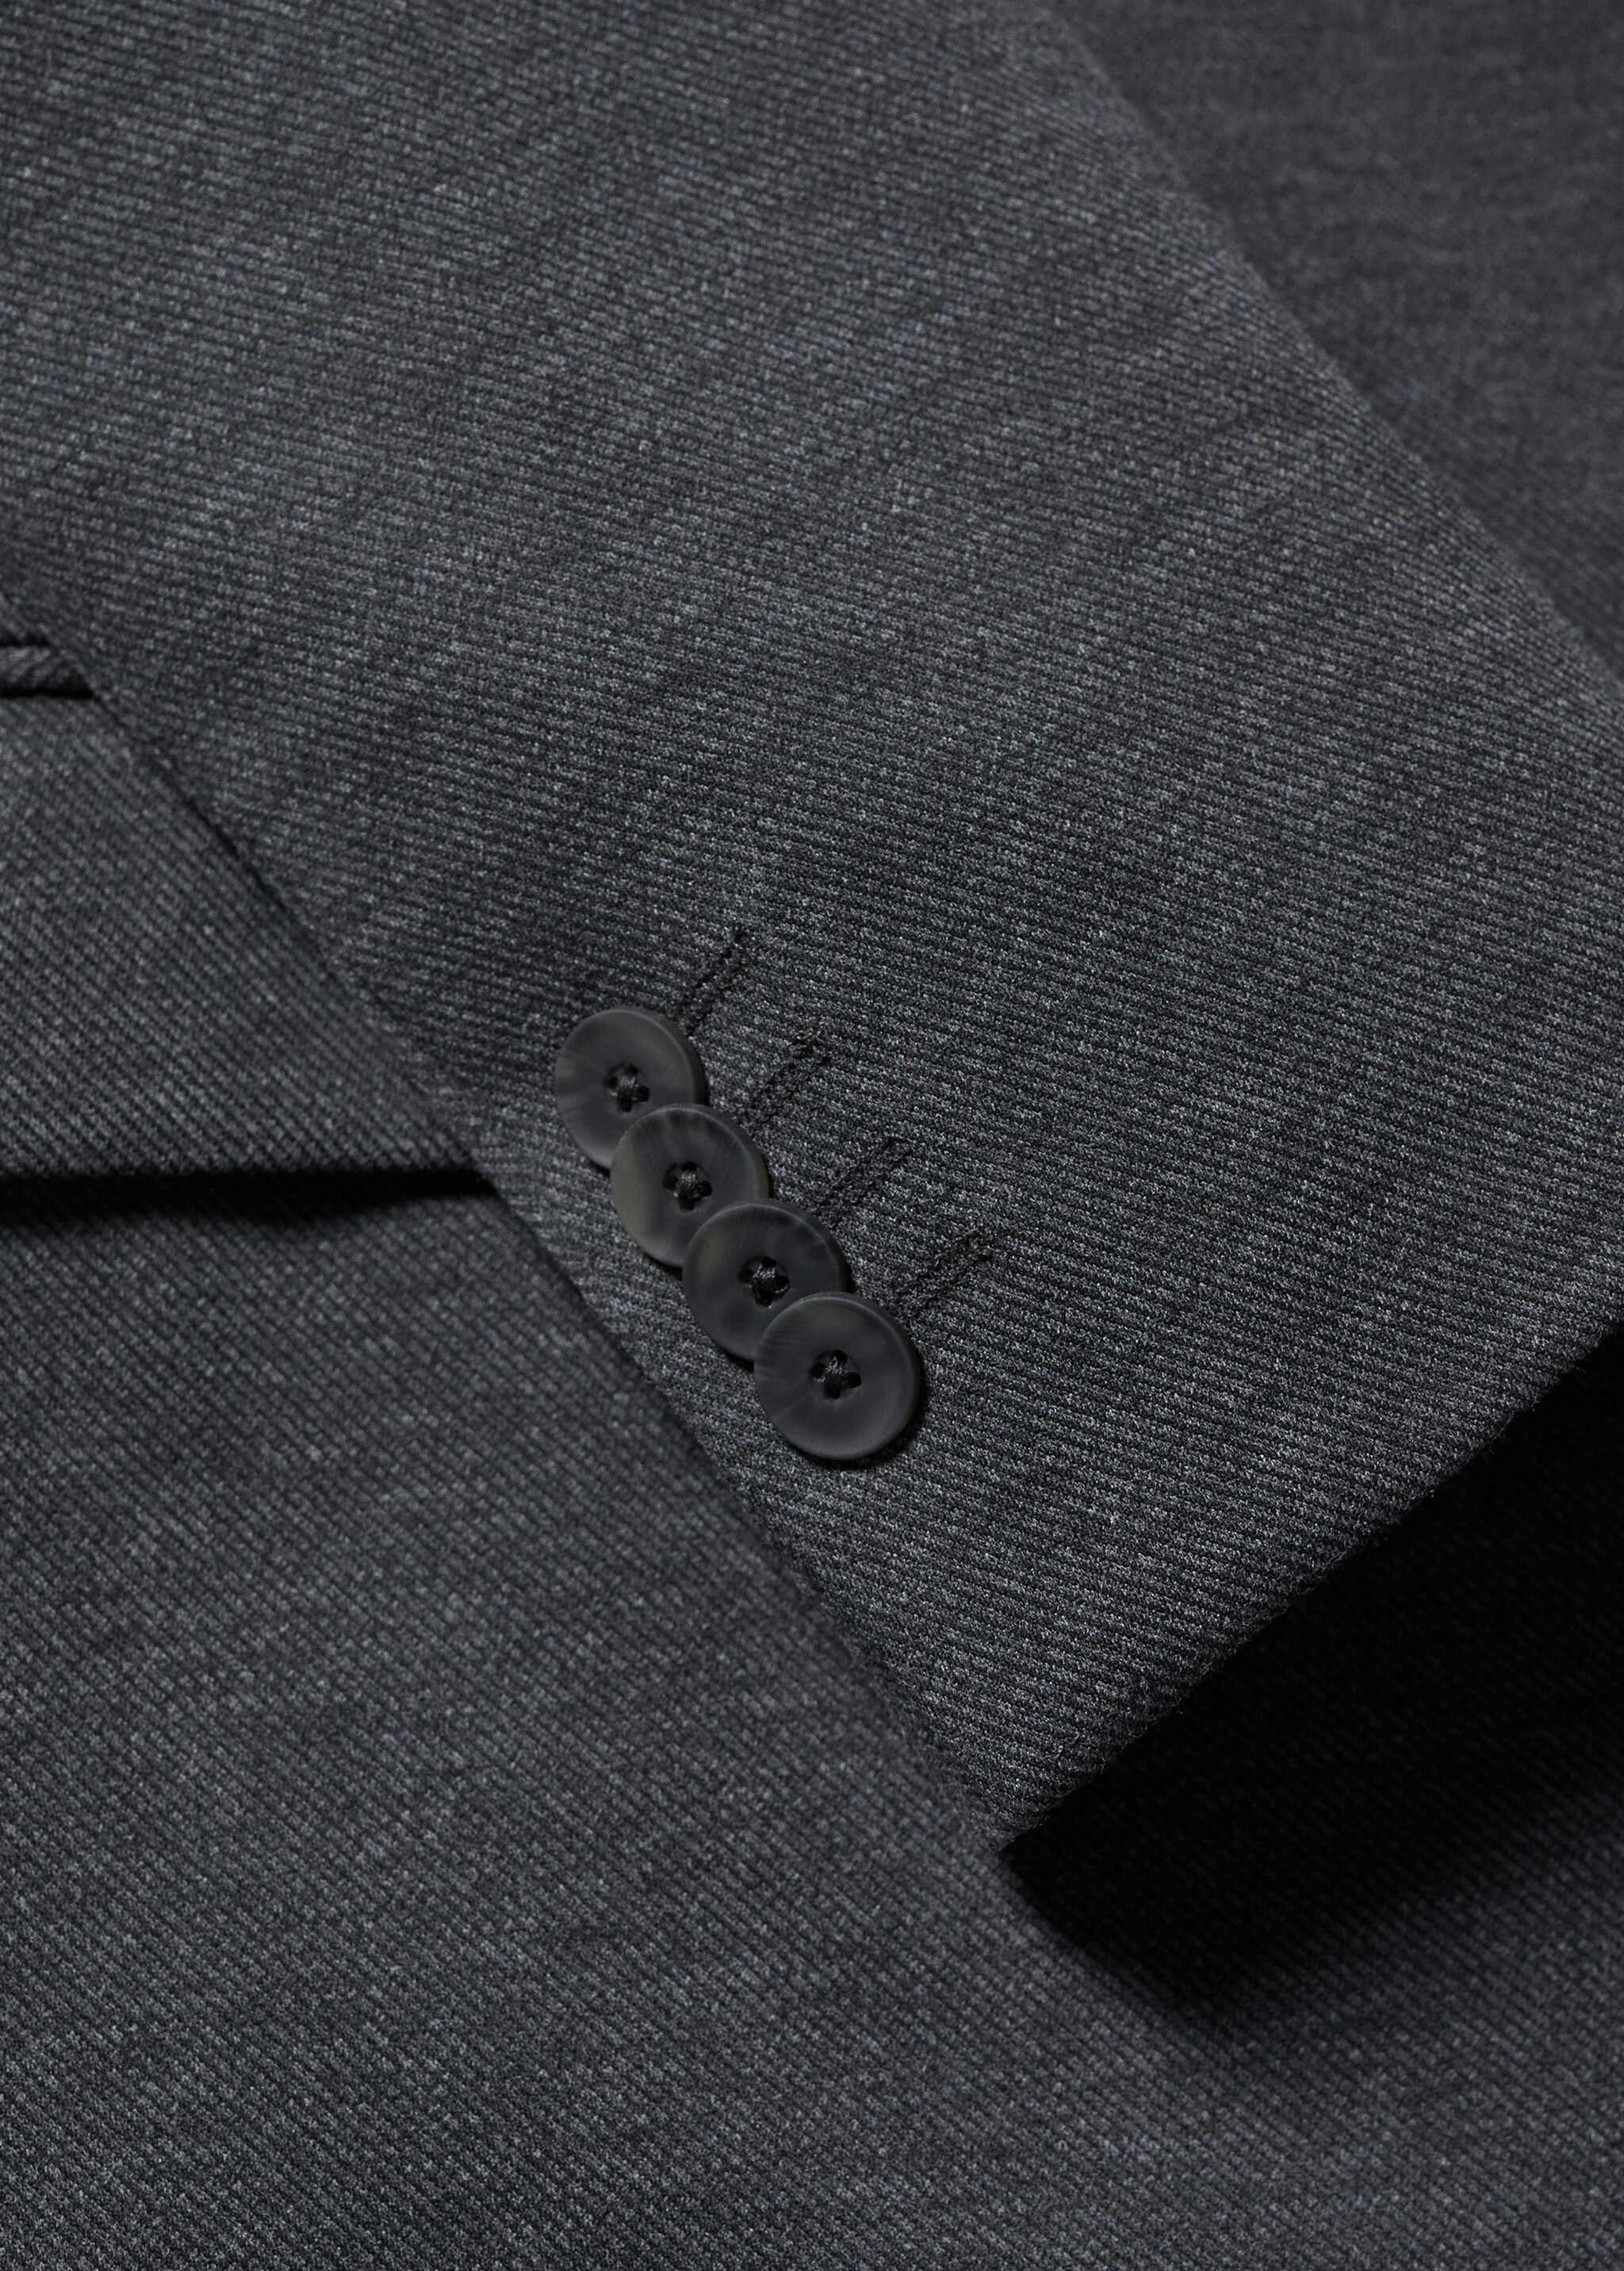 Slim fit microstructure blazer - Details of the article 8